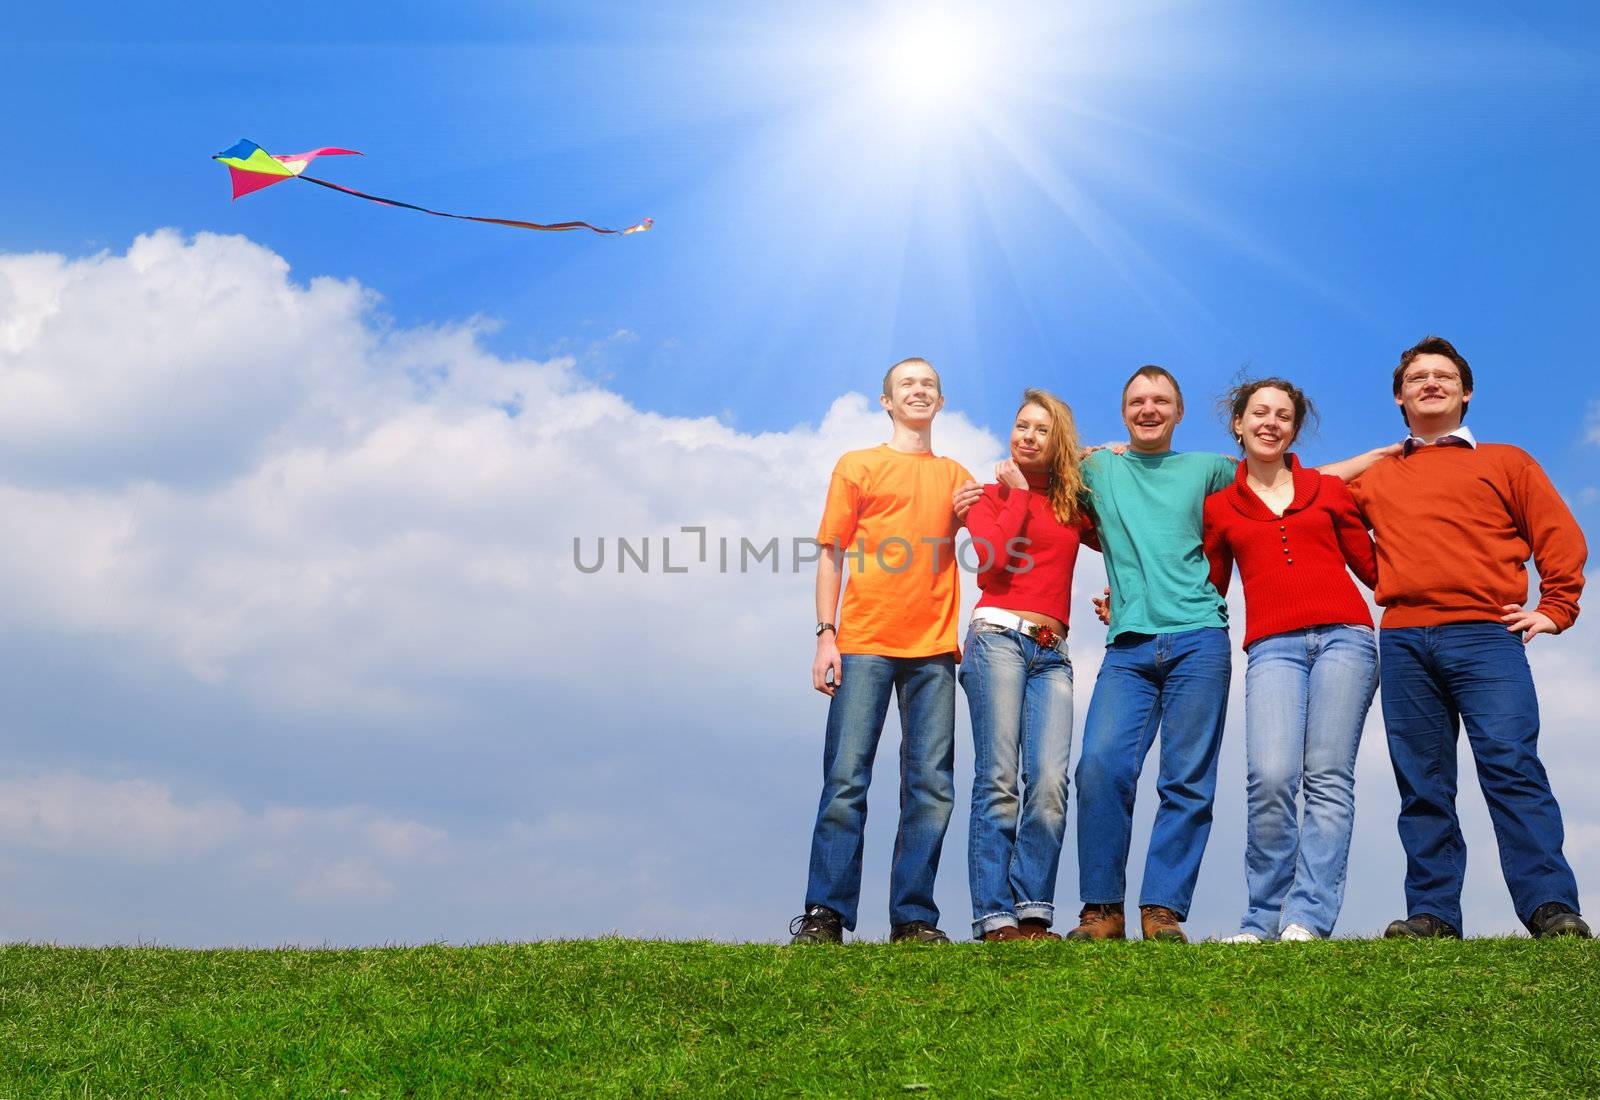 Group of people smiling against blue sky                                    